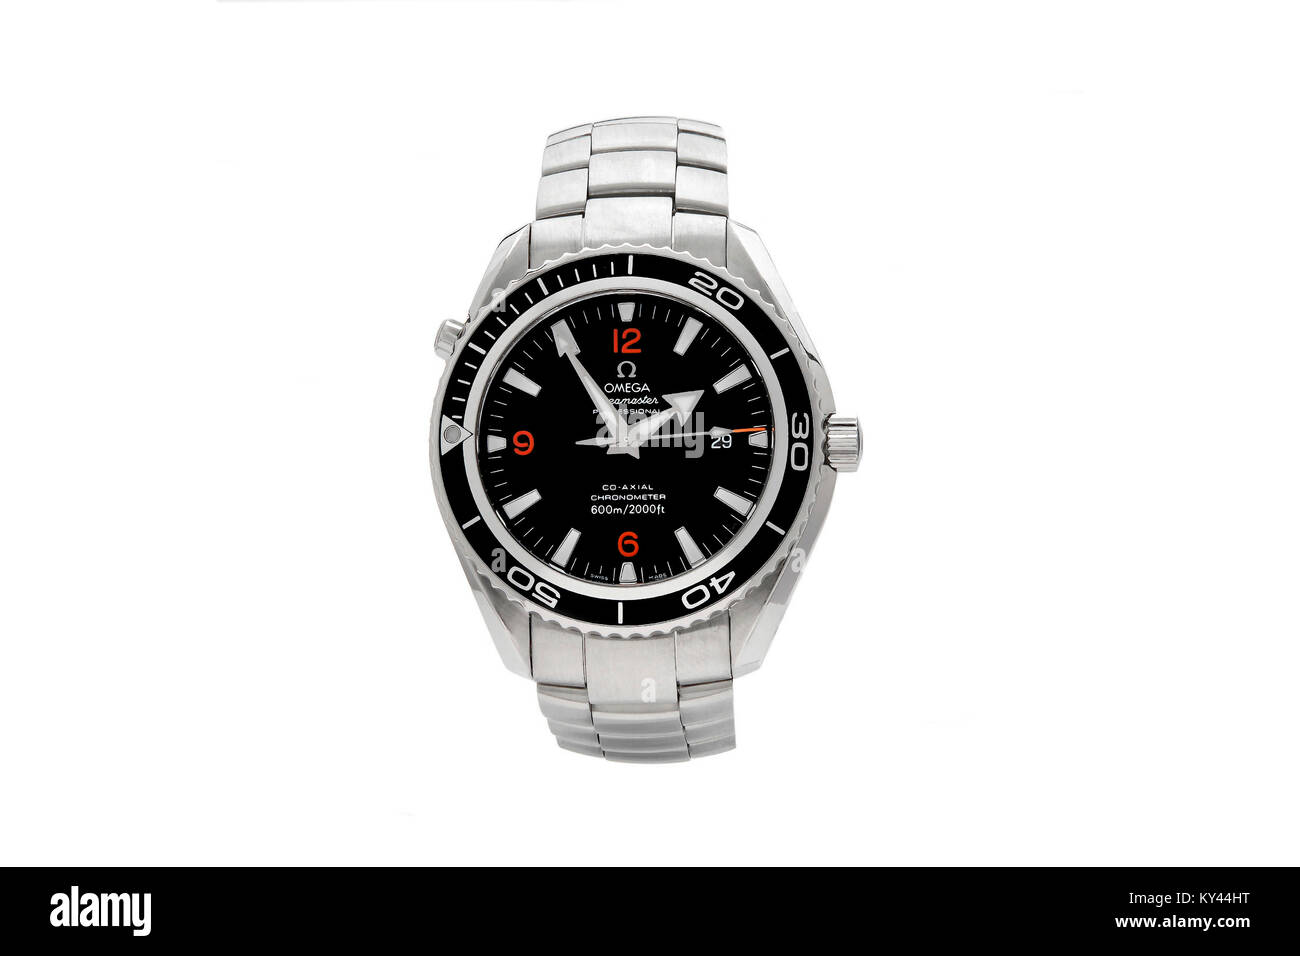 Omega Seamaster stainless steel man's watch with a black face Stock Photo